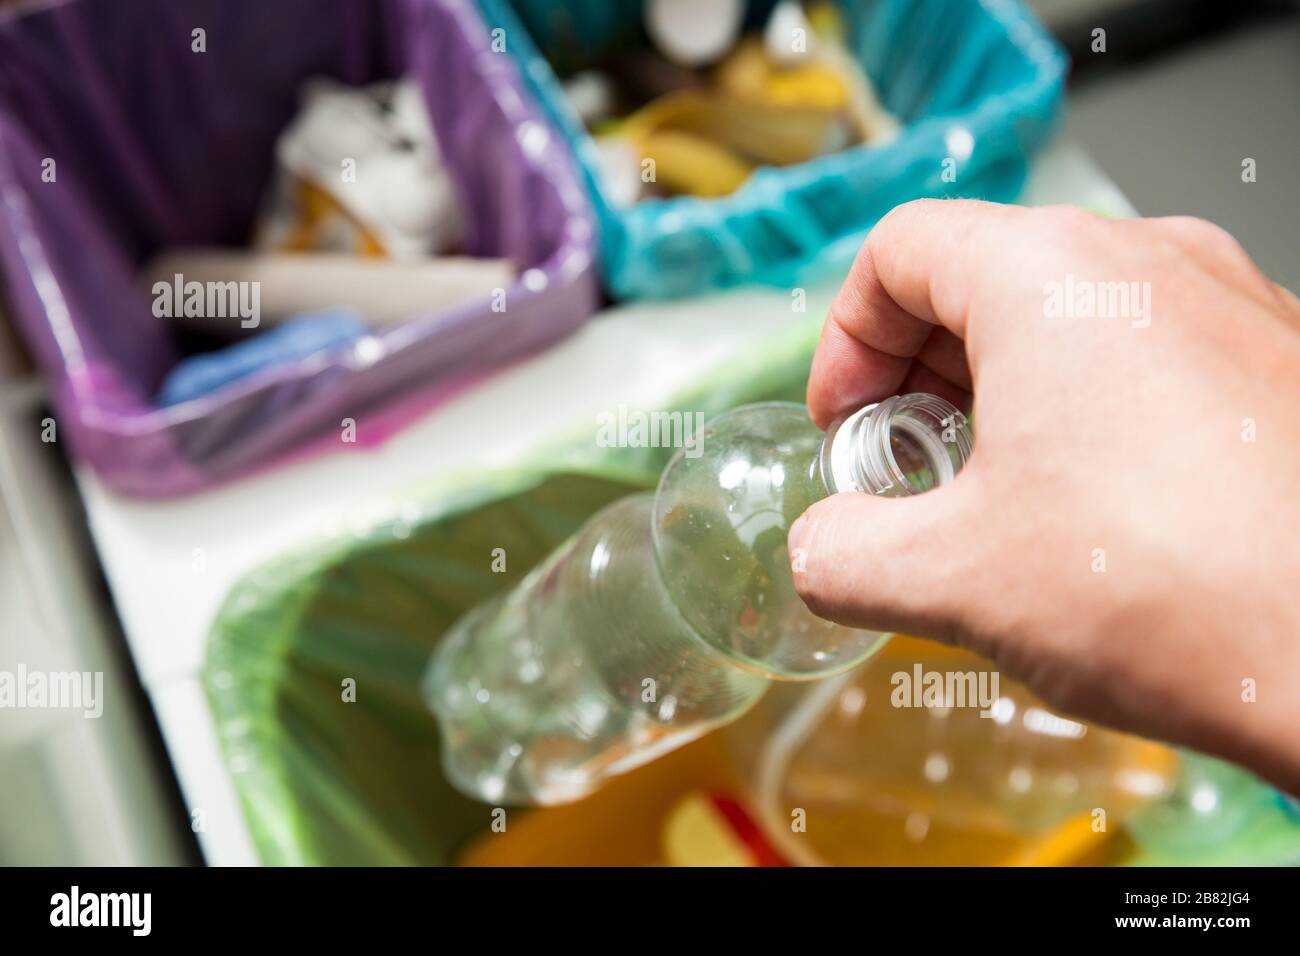 Man putting empty plastic bottle in recycling bin in the kitchen. Person in the house kitchen separating waste. Different trash can with colorful bags Stock Photo